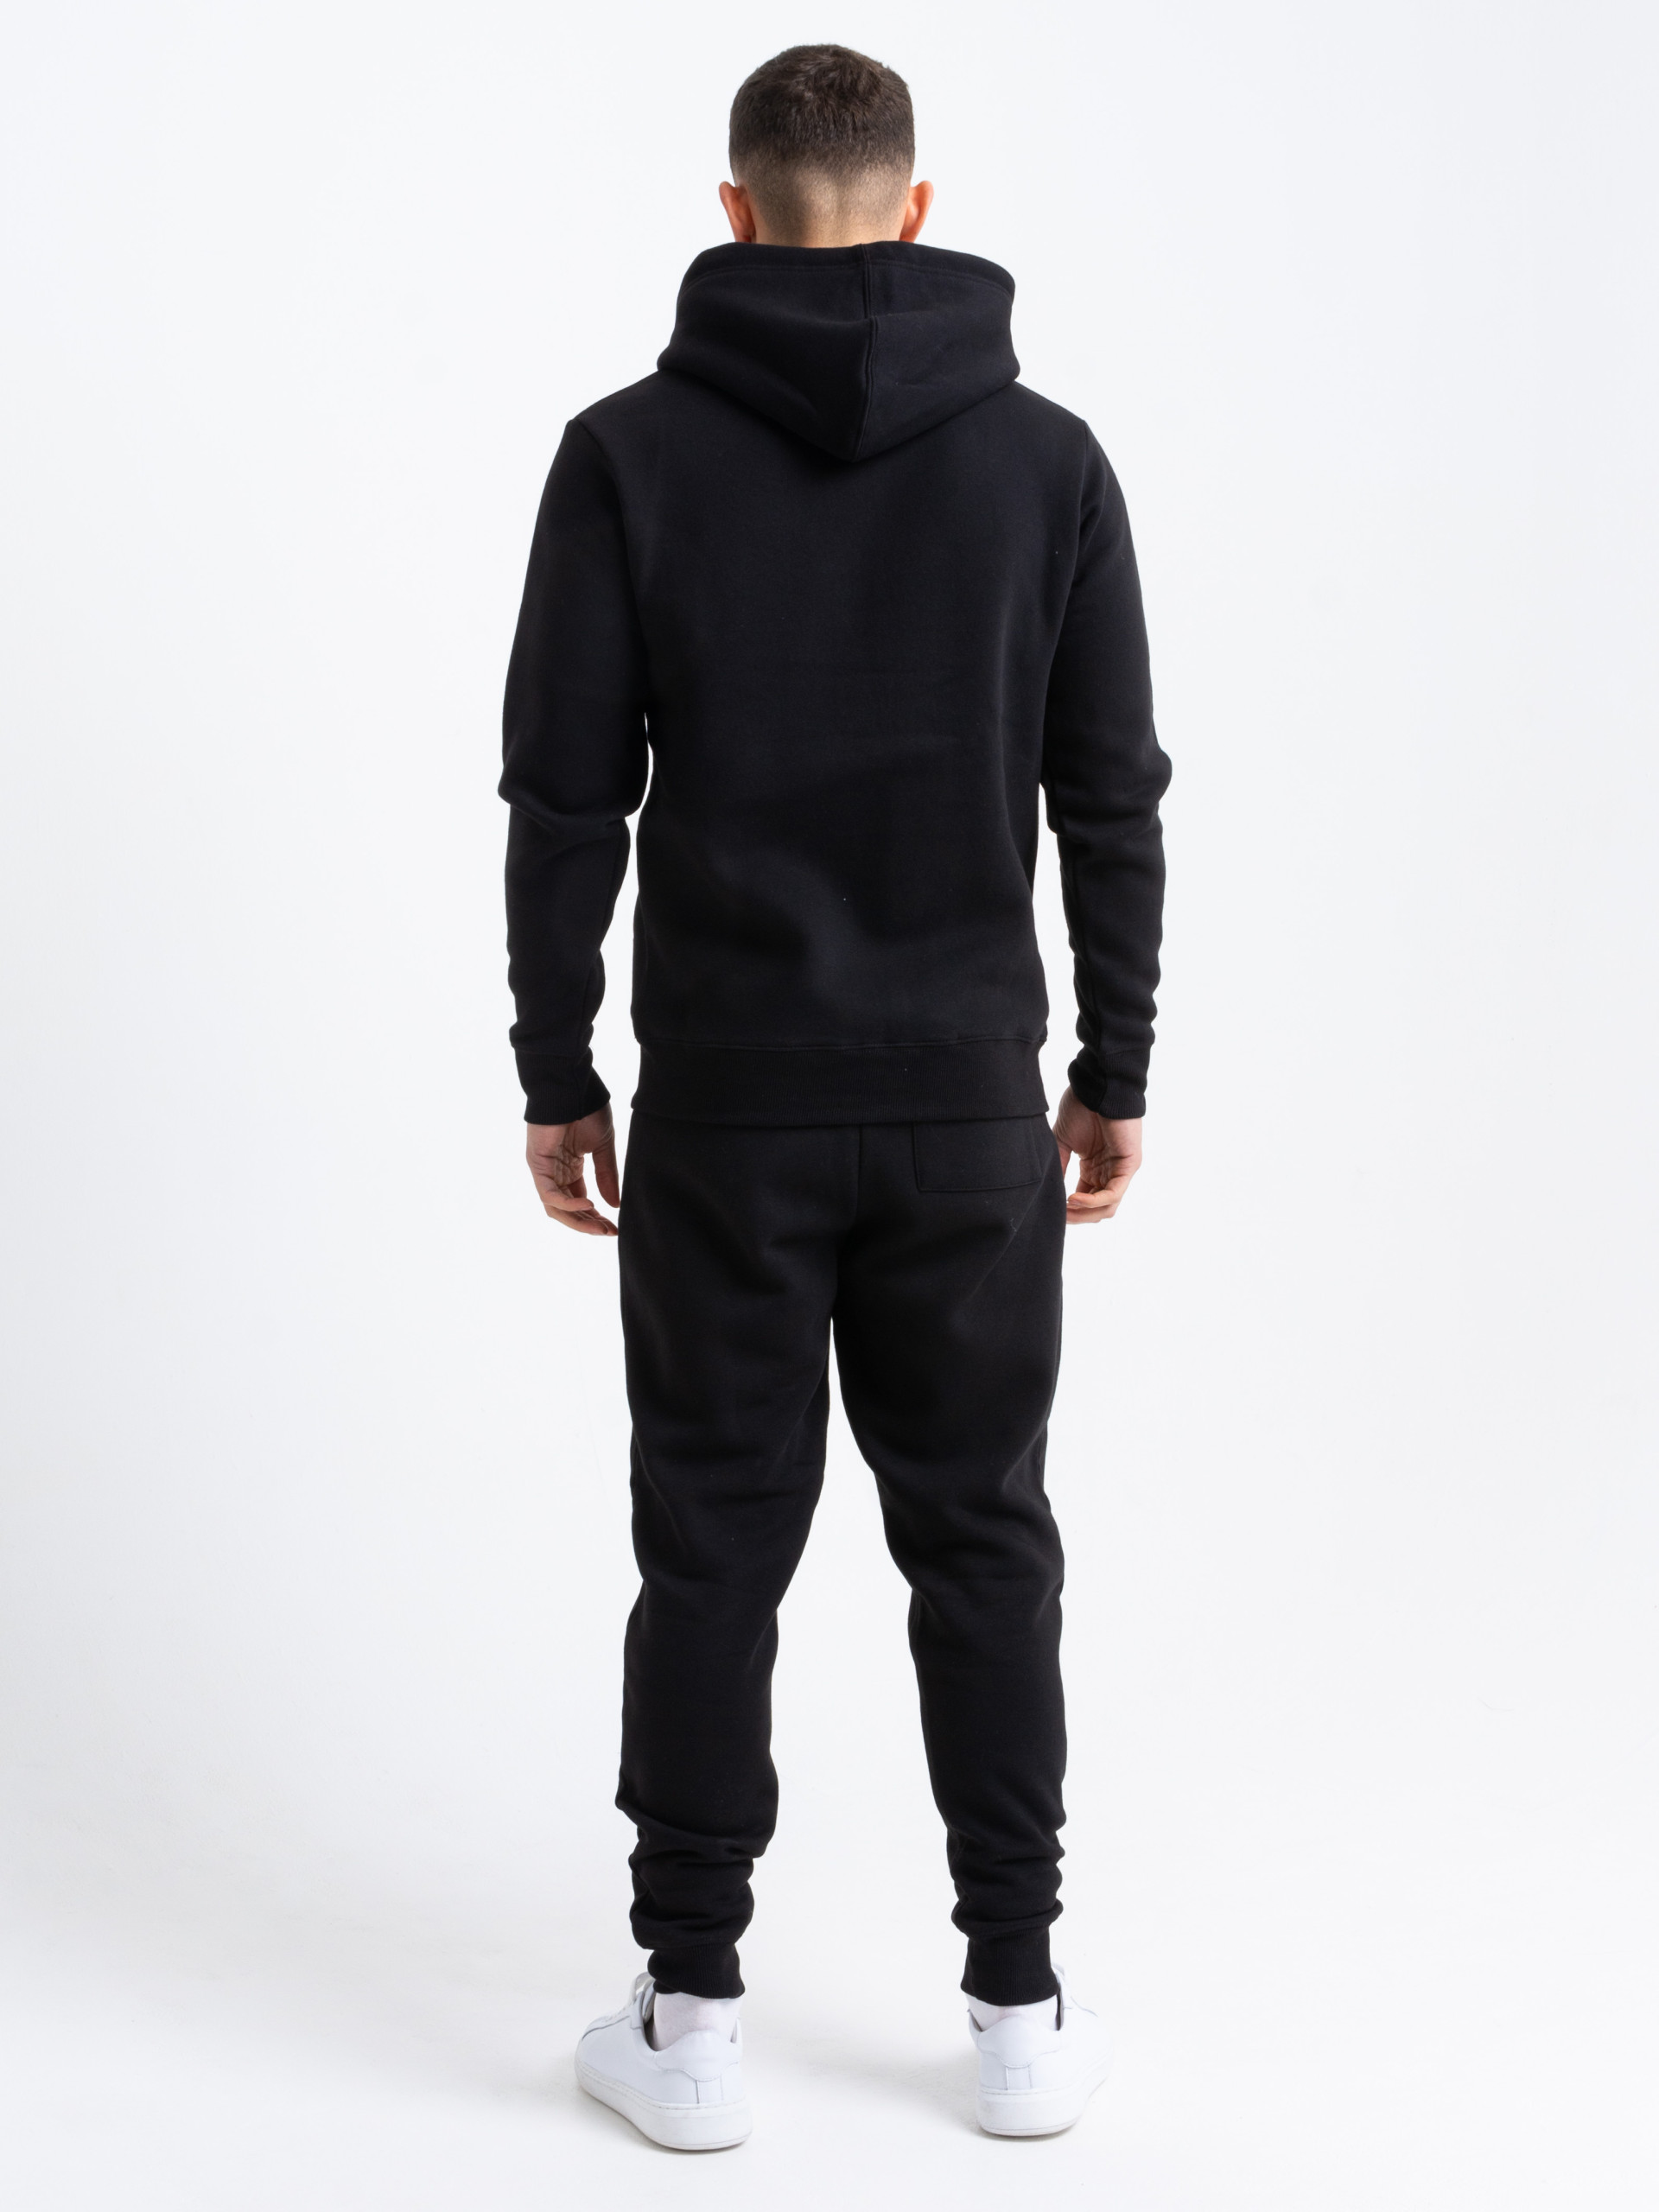 Silver Zip Tracksuit in Black | Men's Clothing & Fashion | HisColumn